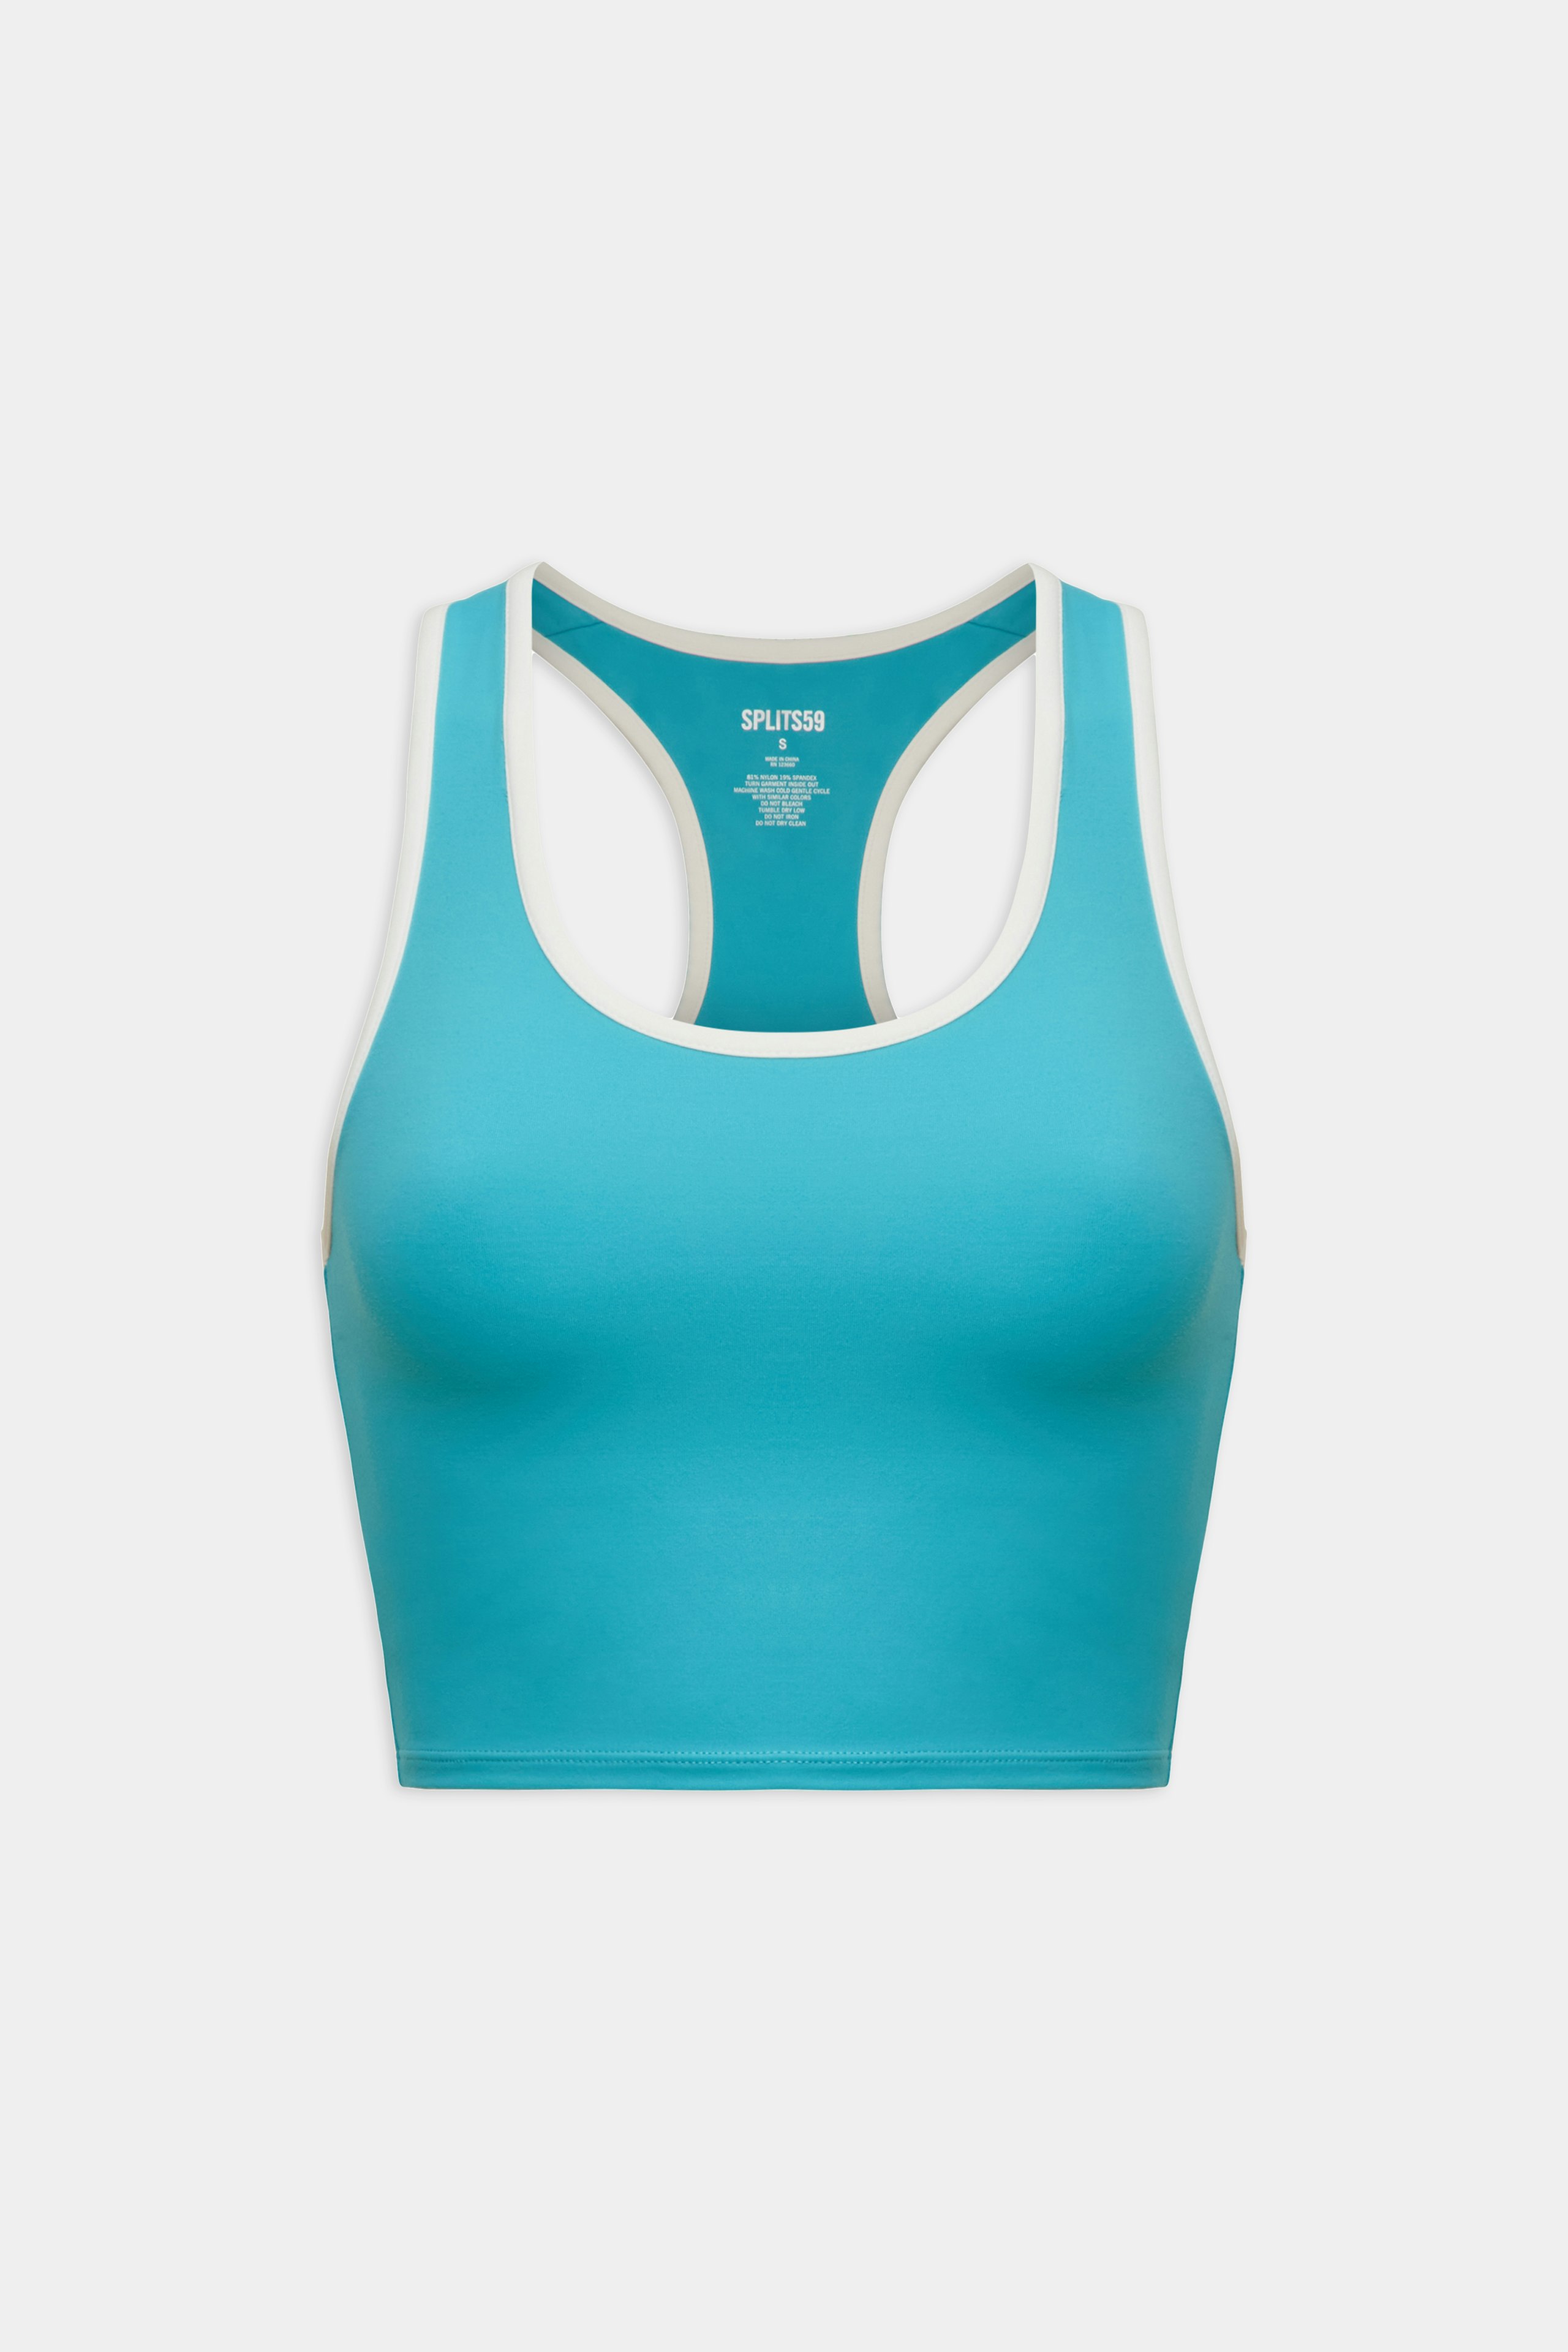 22-778-TOC-AMBER AIRWEIGHT BRALETTE IN AQUA-GHOST-FRONT-2